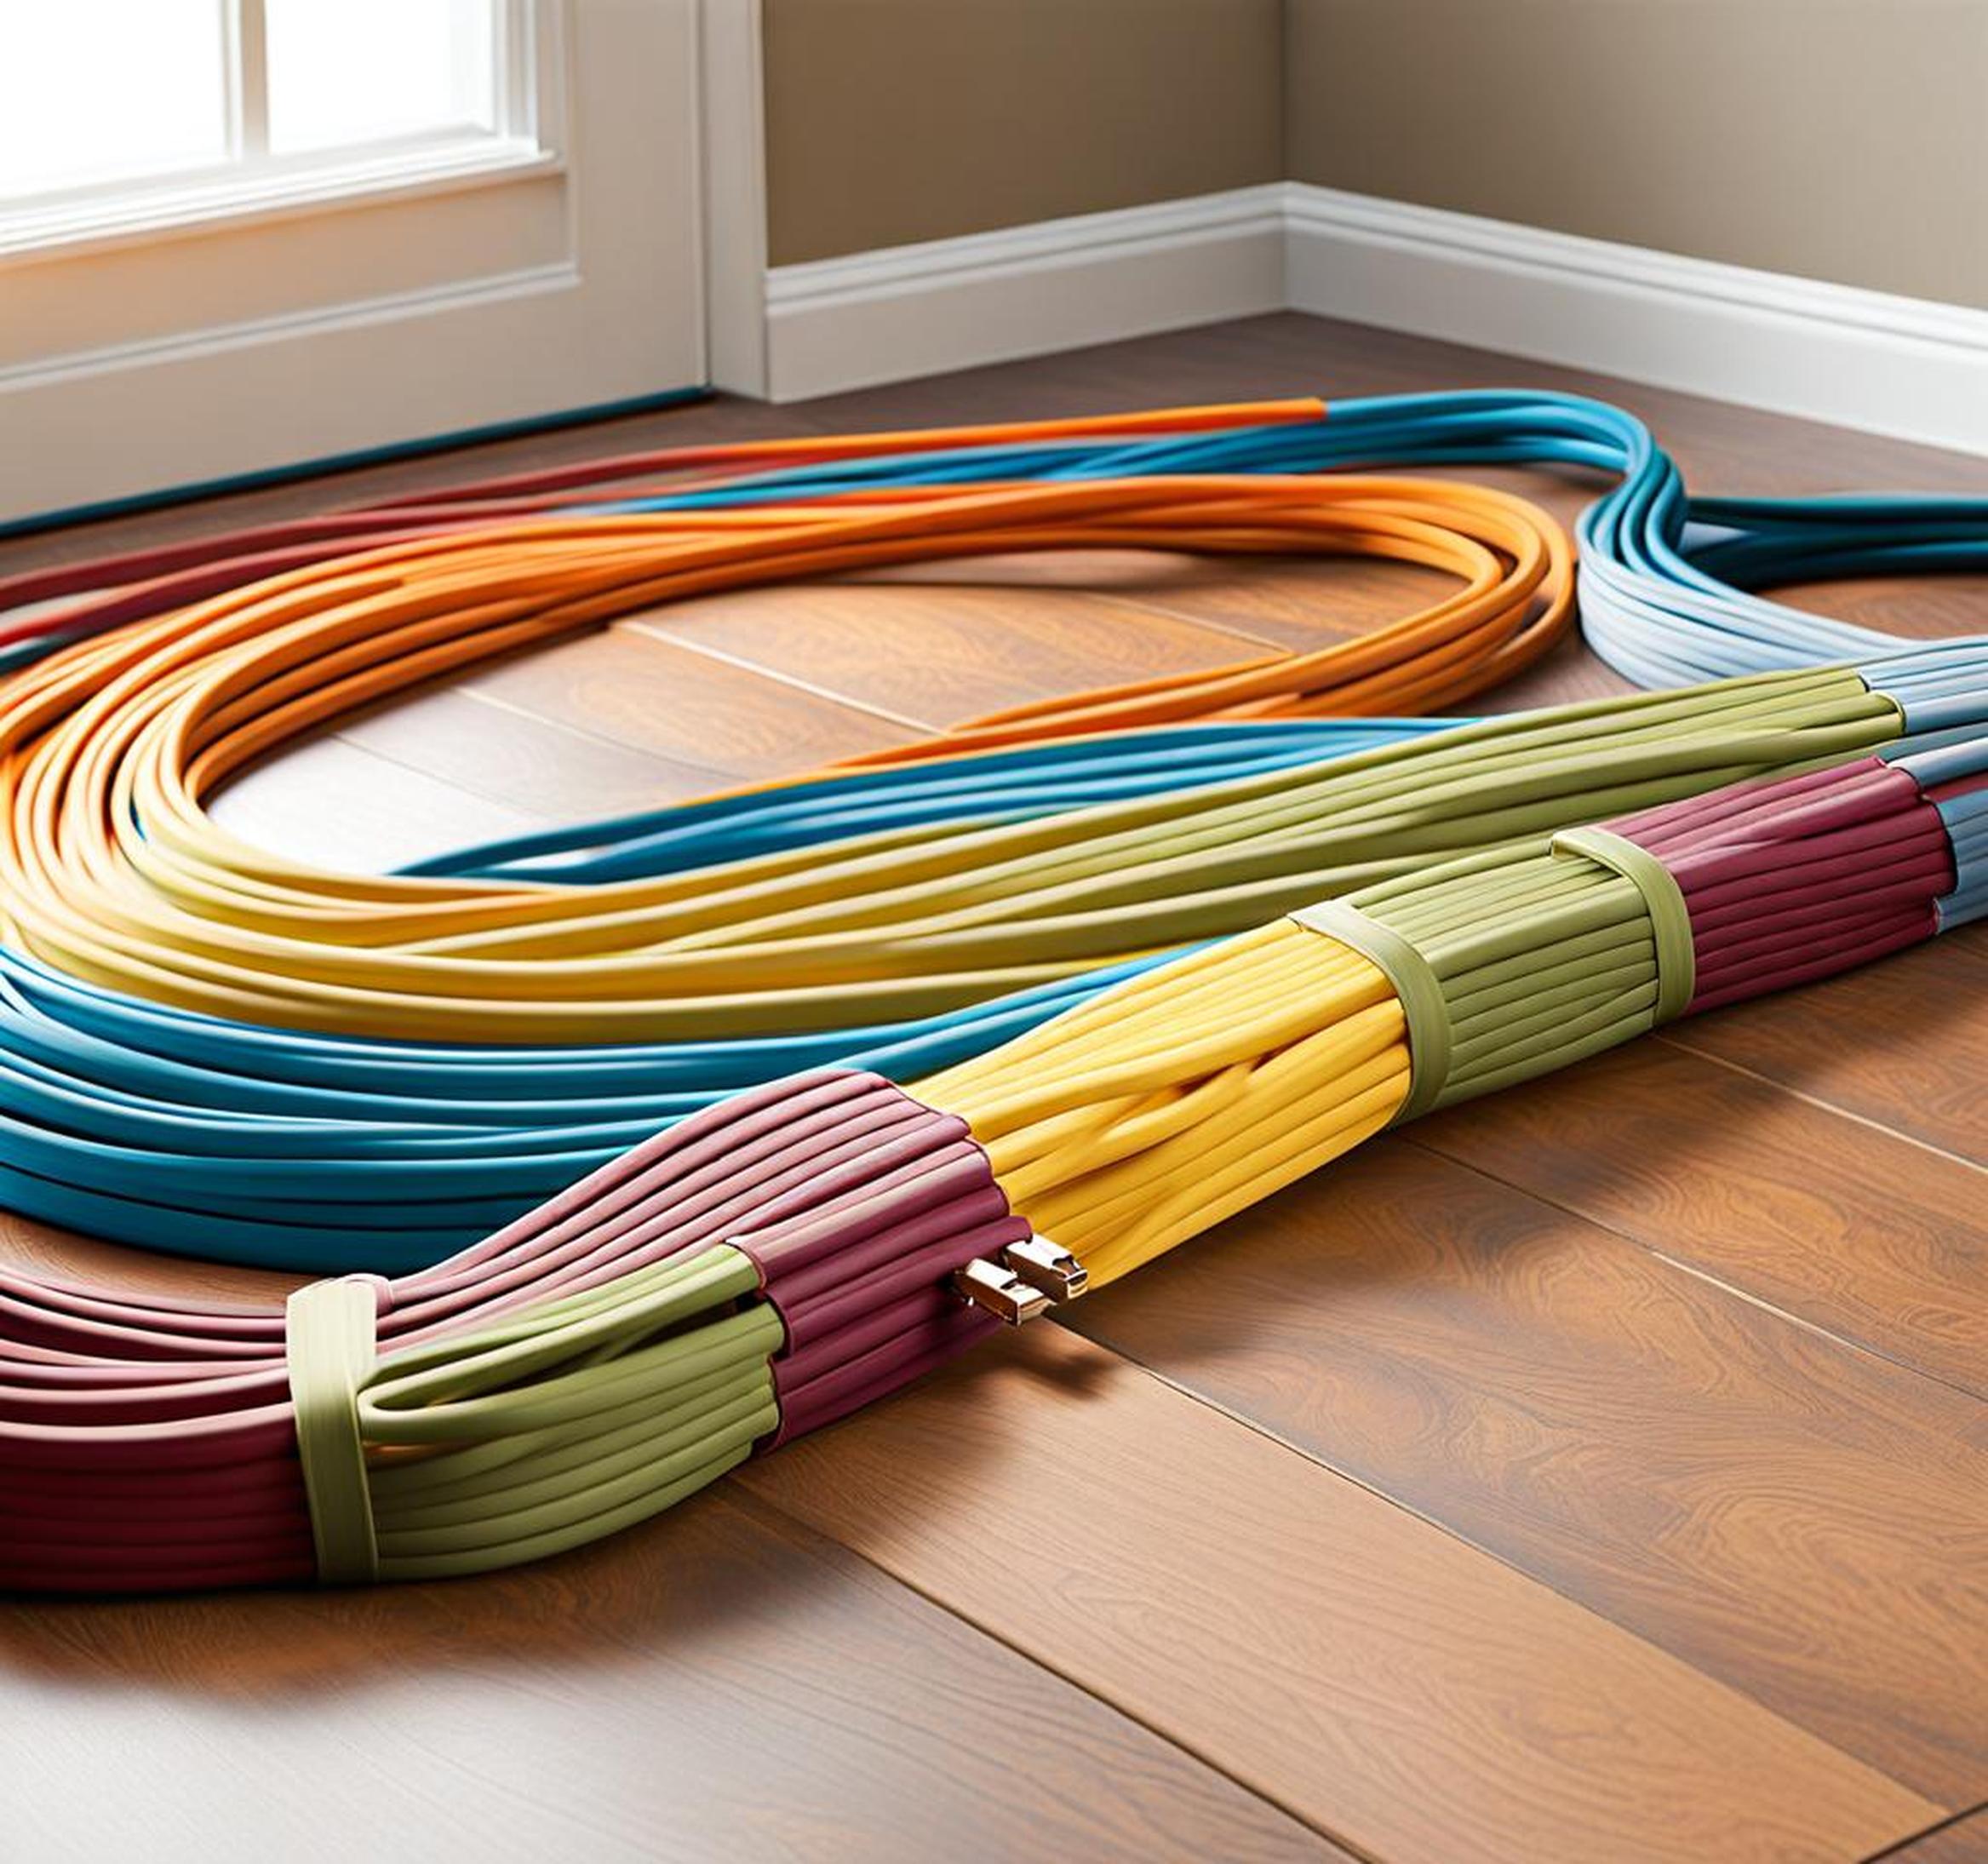 Frustrated by Bulky Cords? Use Flexible Flat Extensions to Discretely Hide Wires Under Rugs